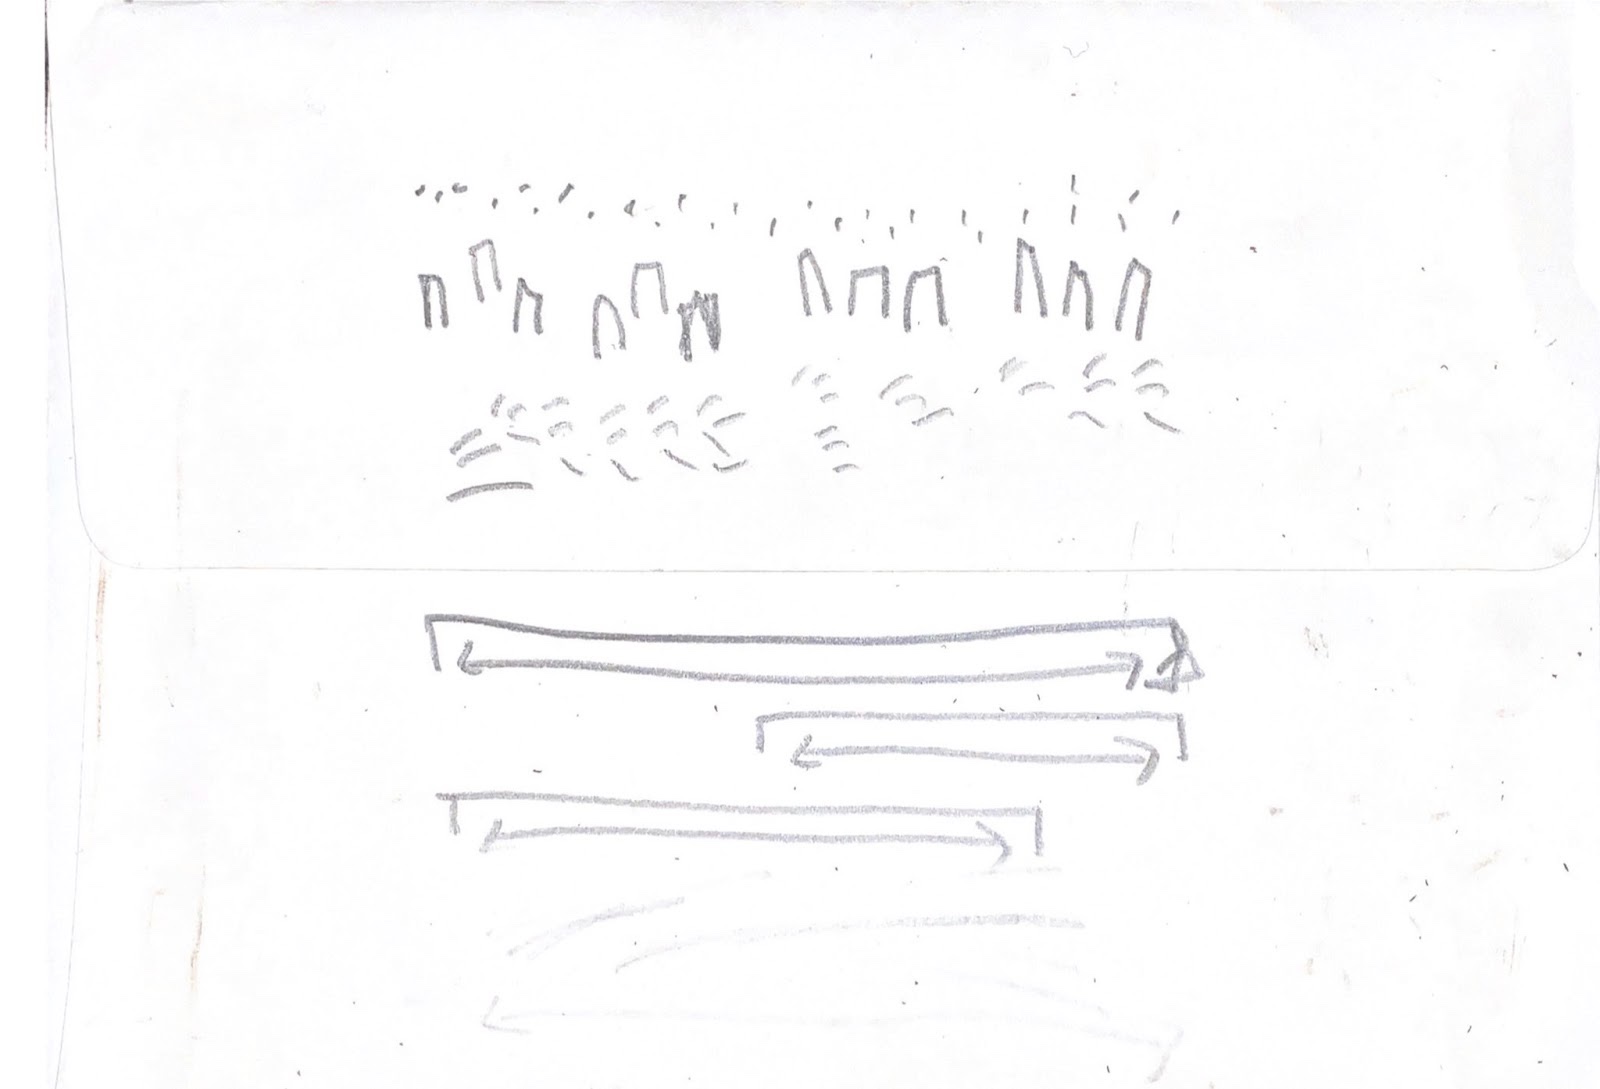 The second image in a series of sound design sketches by Talia Augustidis. This image is called Queen of Dogs. Drawn on plain paper, we can see a series of rhythmic pencil markings in the top half of the image. A combination of dots, dashes and little pencil mountains layered in lines one after the other. Below we can see three horizontal arrows of varying lengths, they look as if they are marking out blocks of time.